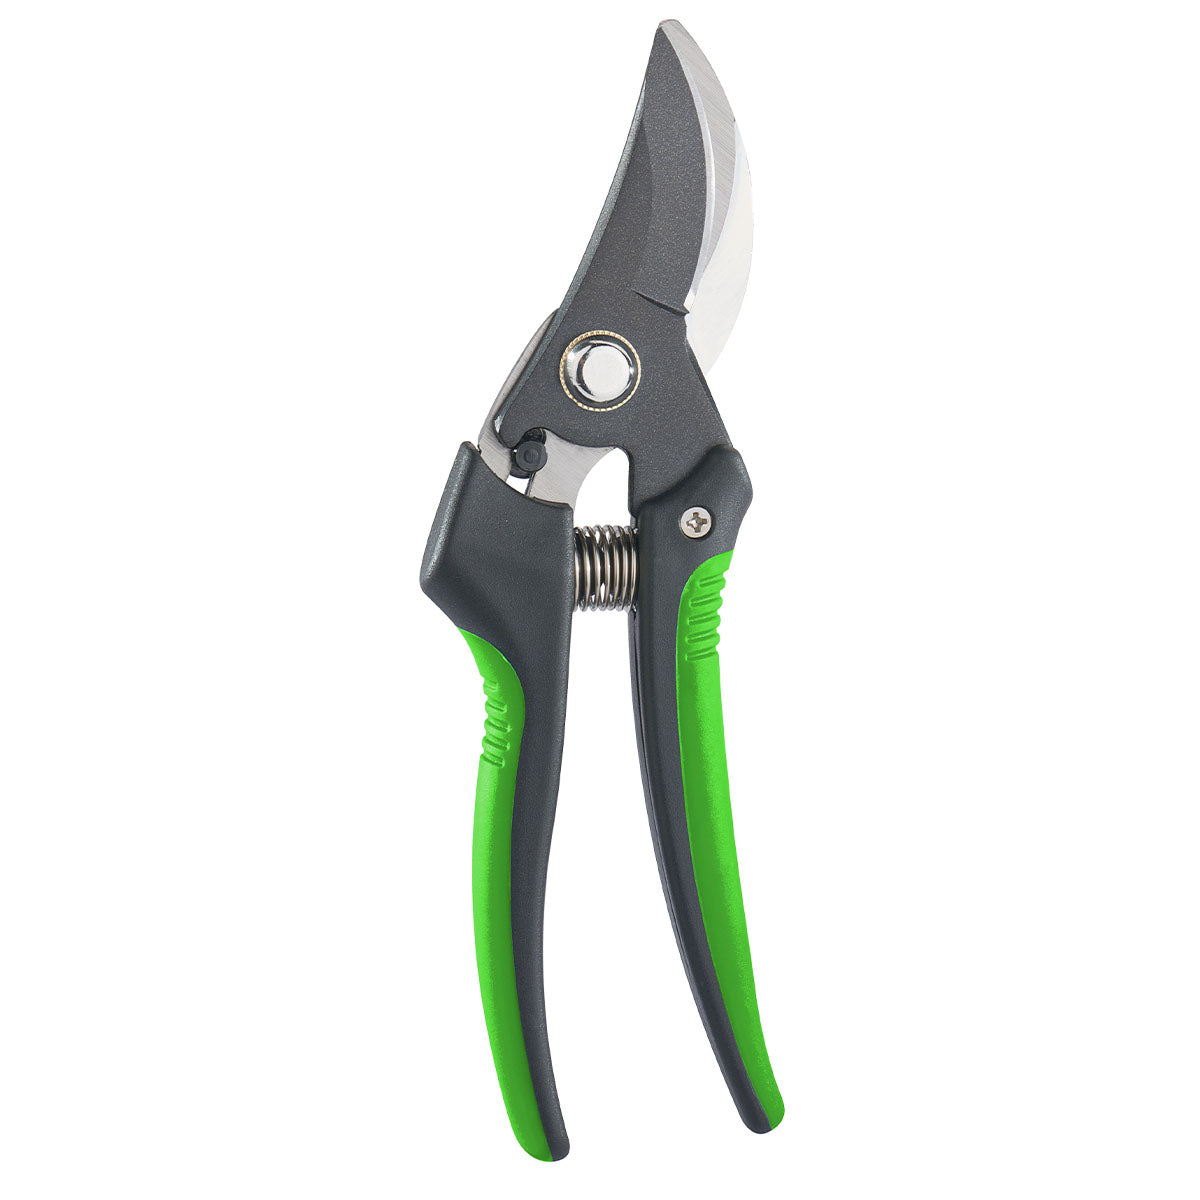 8" BYPASS SECATEURS shears soft grip handle pruning trimming cutting 